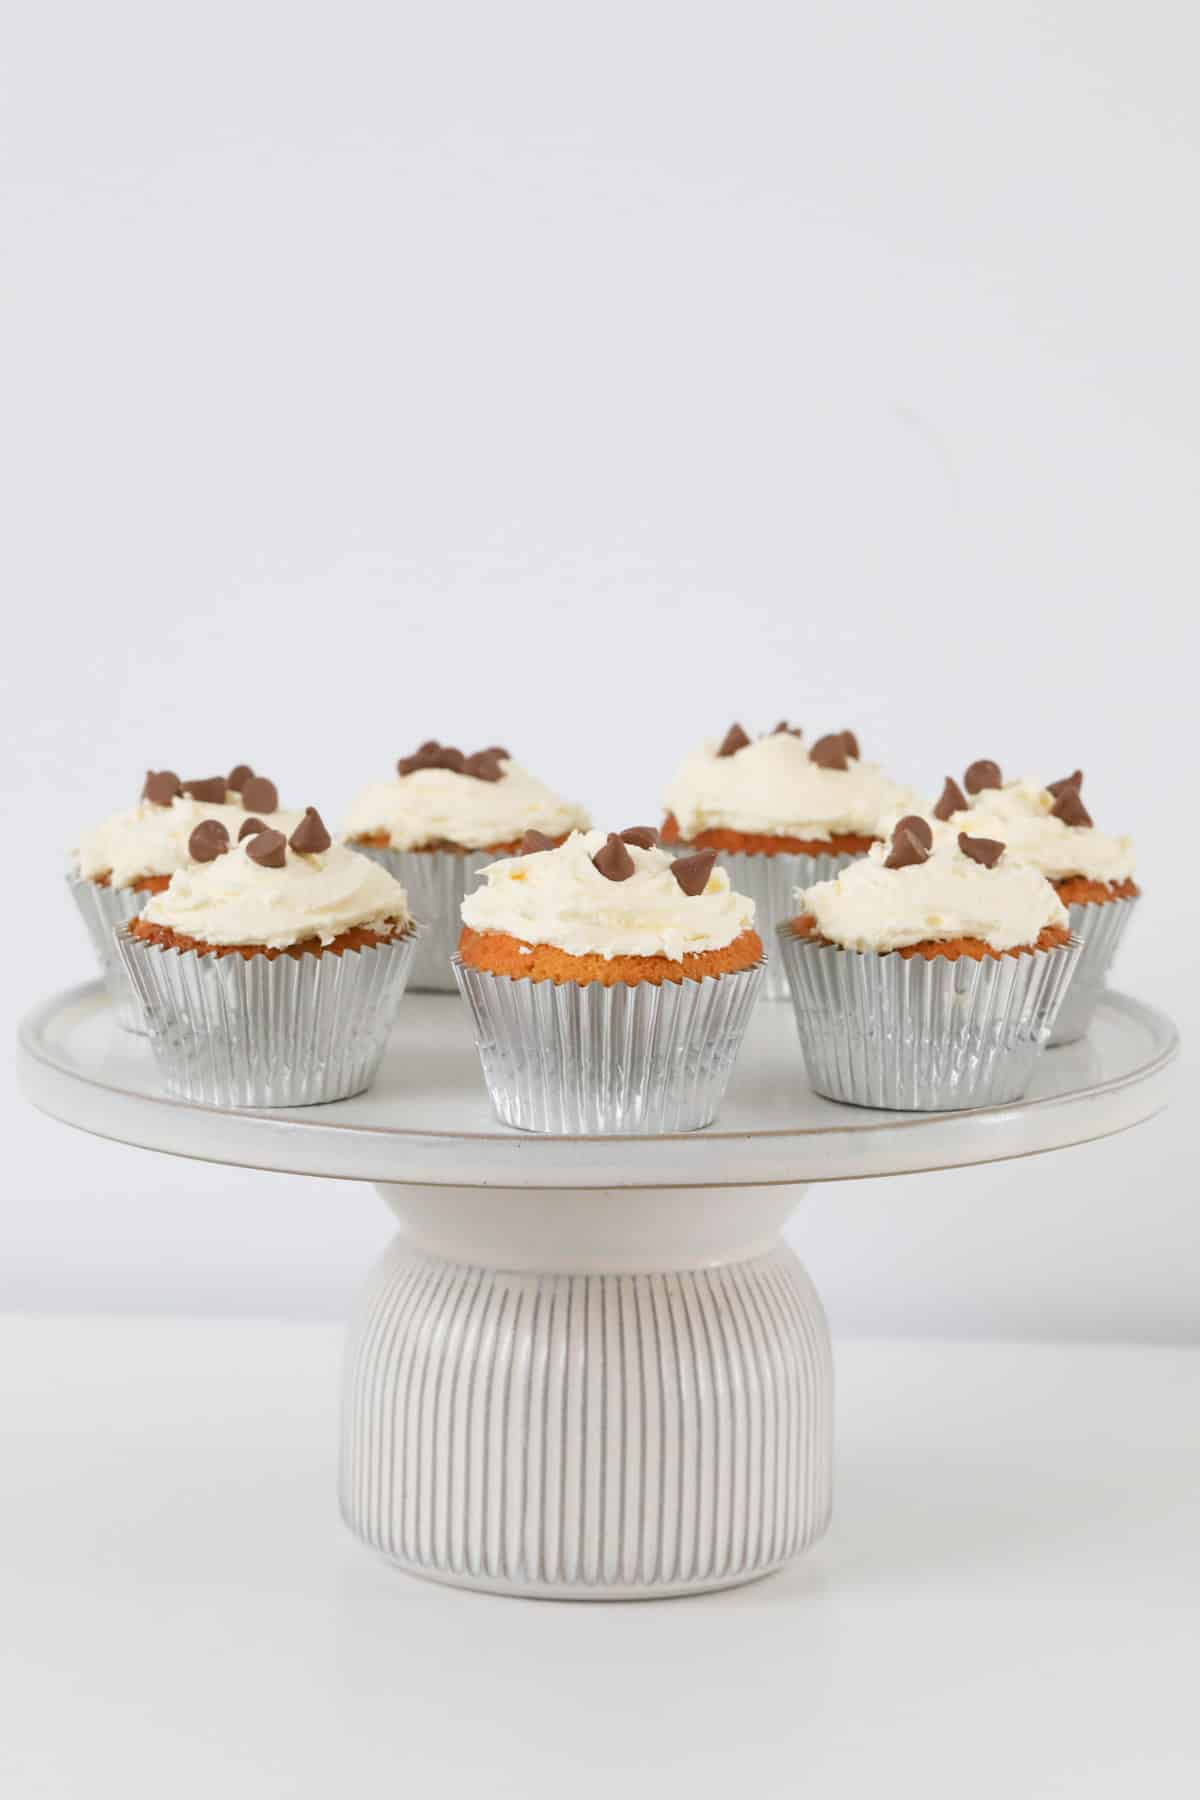 Cupcakes topped with chocolate chips on a white cake stand